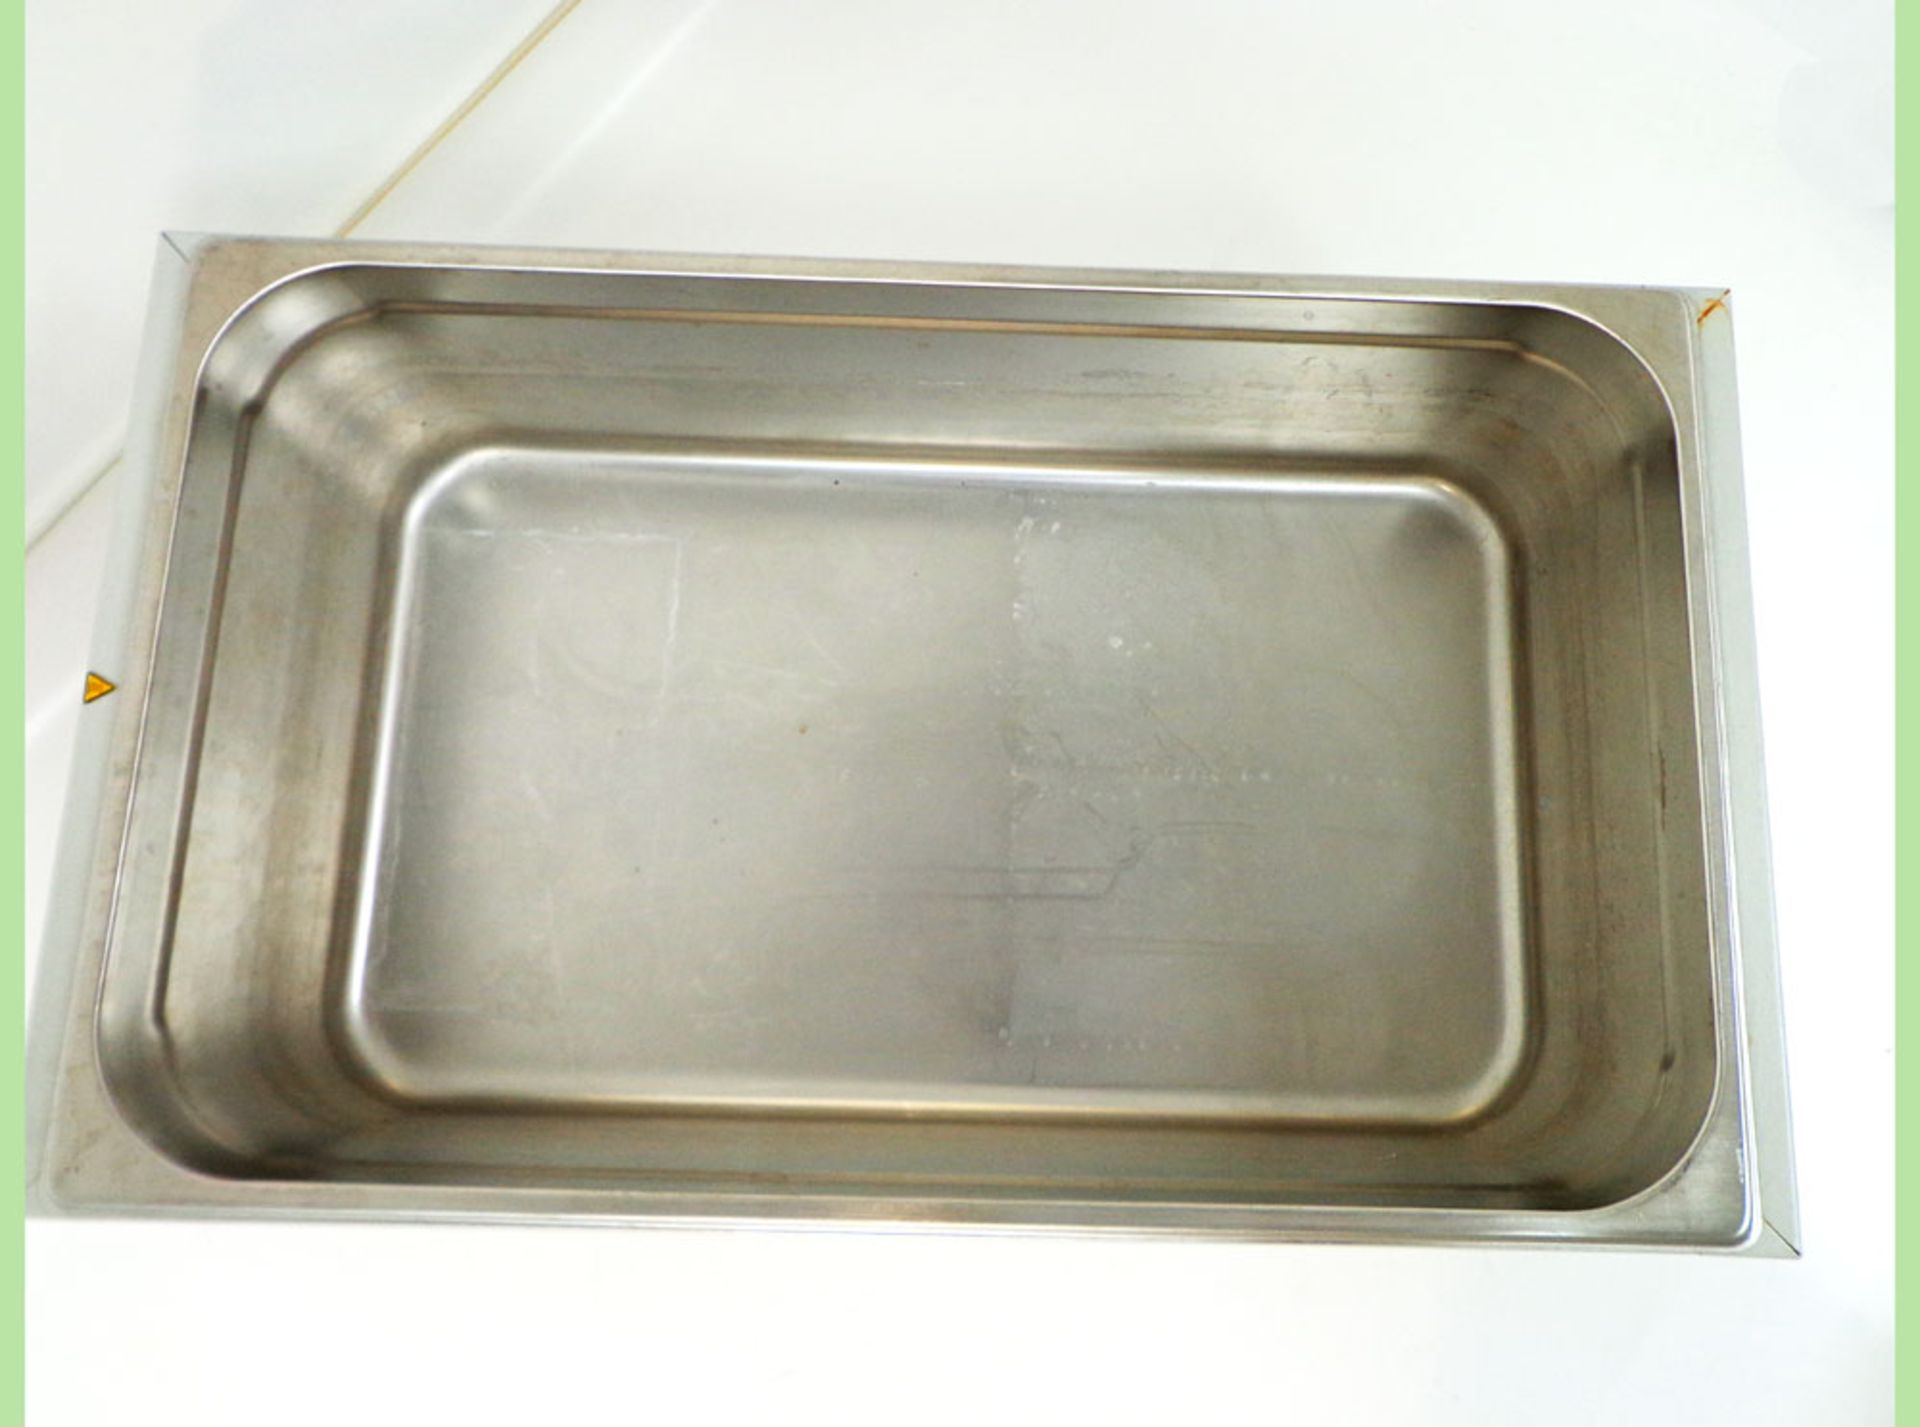 Fisher Scientific Water Bath DMU19, Without Lid, serial number 1Z0737006 (Ref: WA11843) - Image 4 of 5